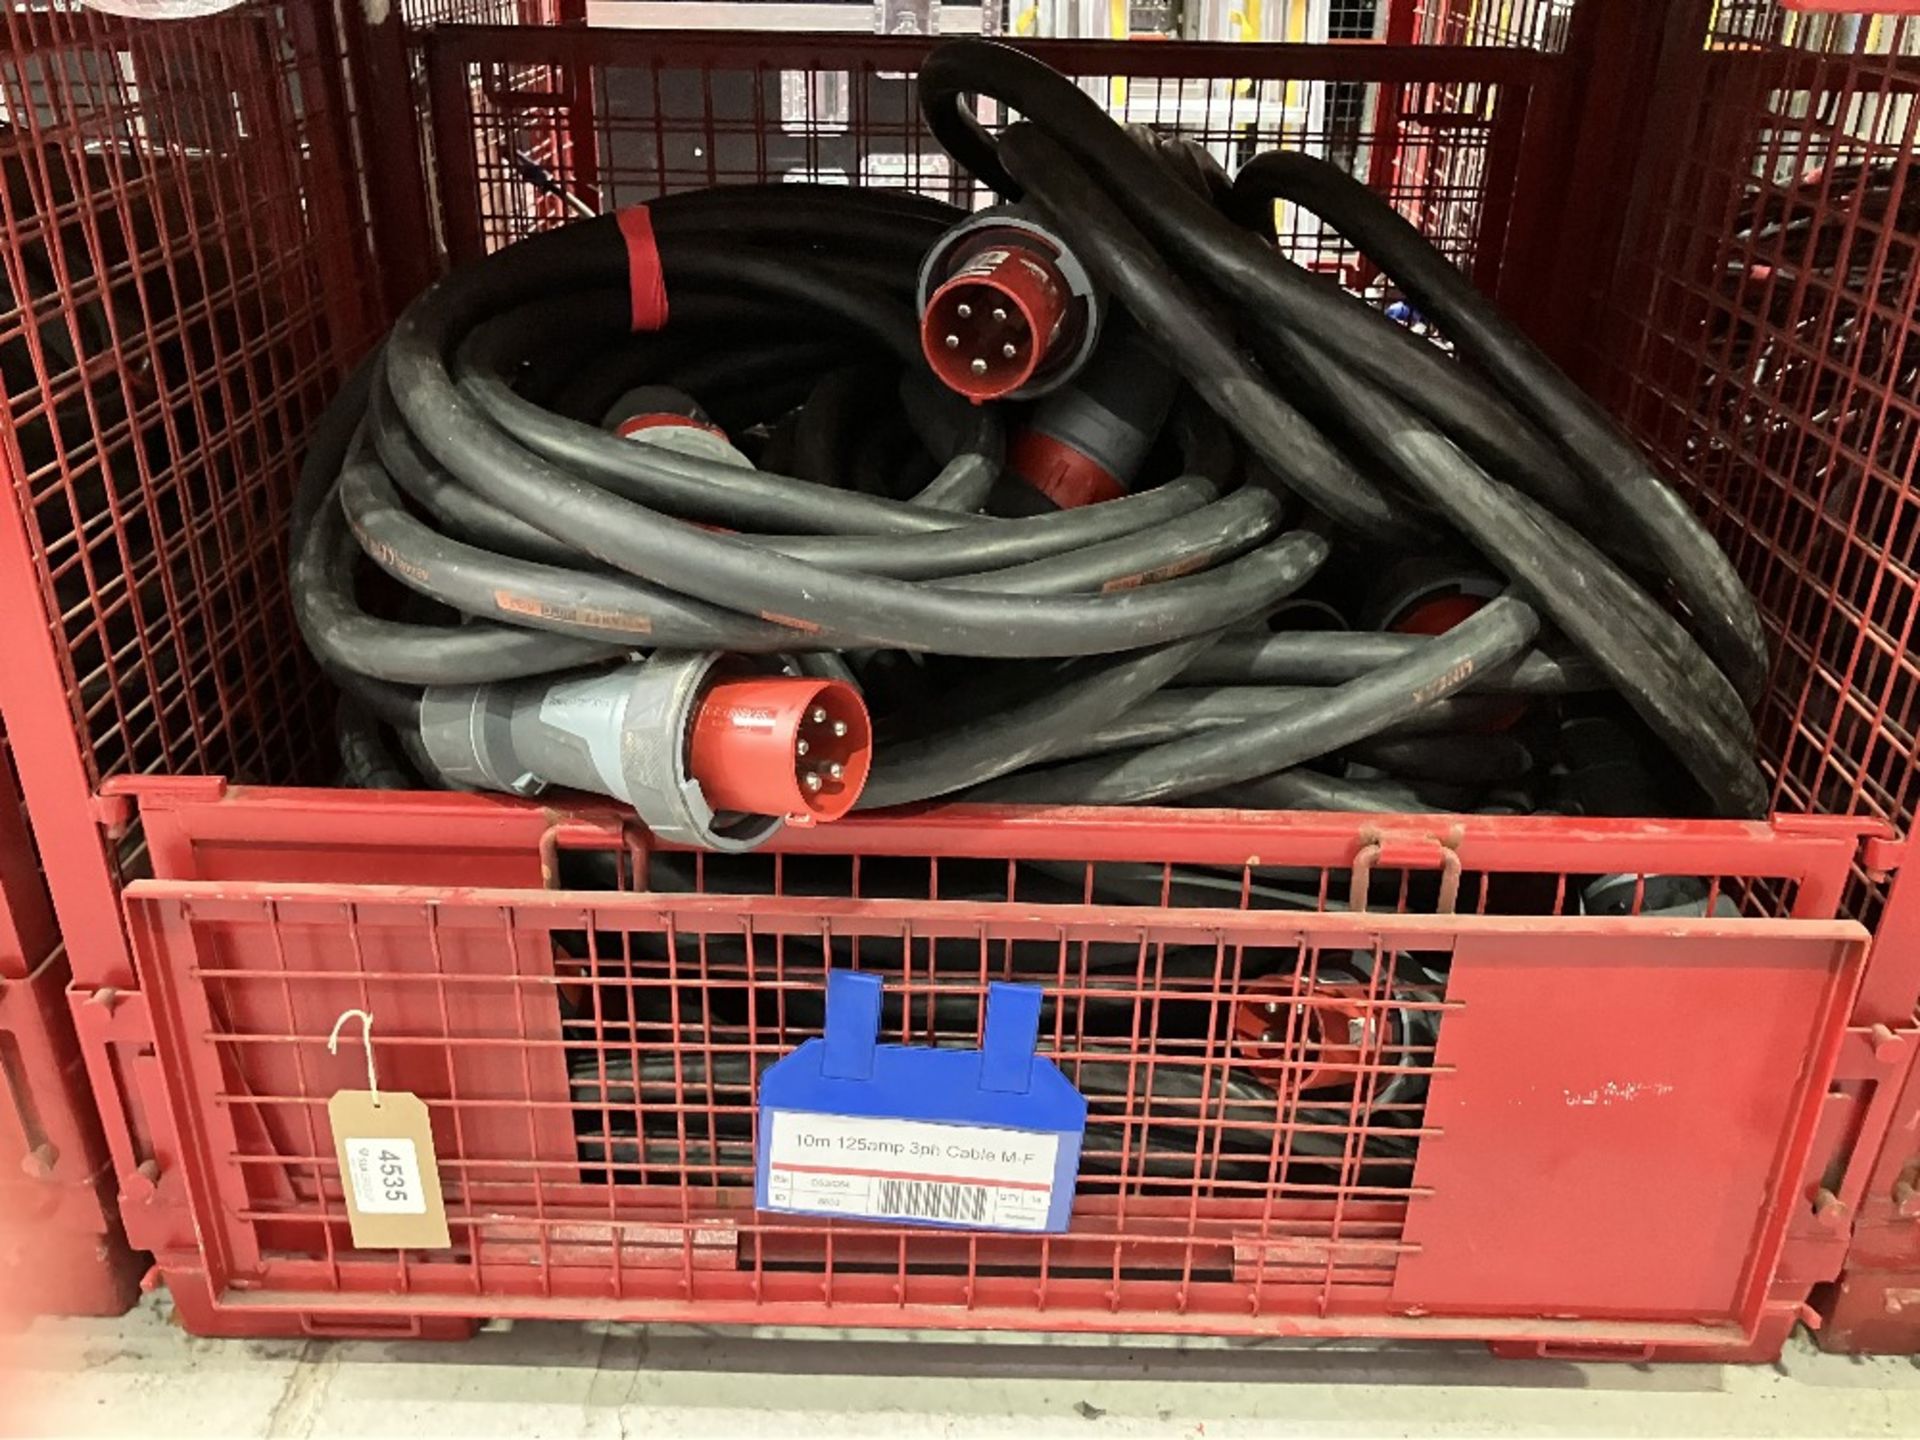 Large Quantity of 10M 125amp 3ph Cable M-F with Steel Fabricated Stillage